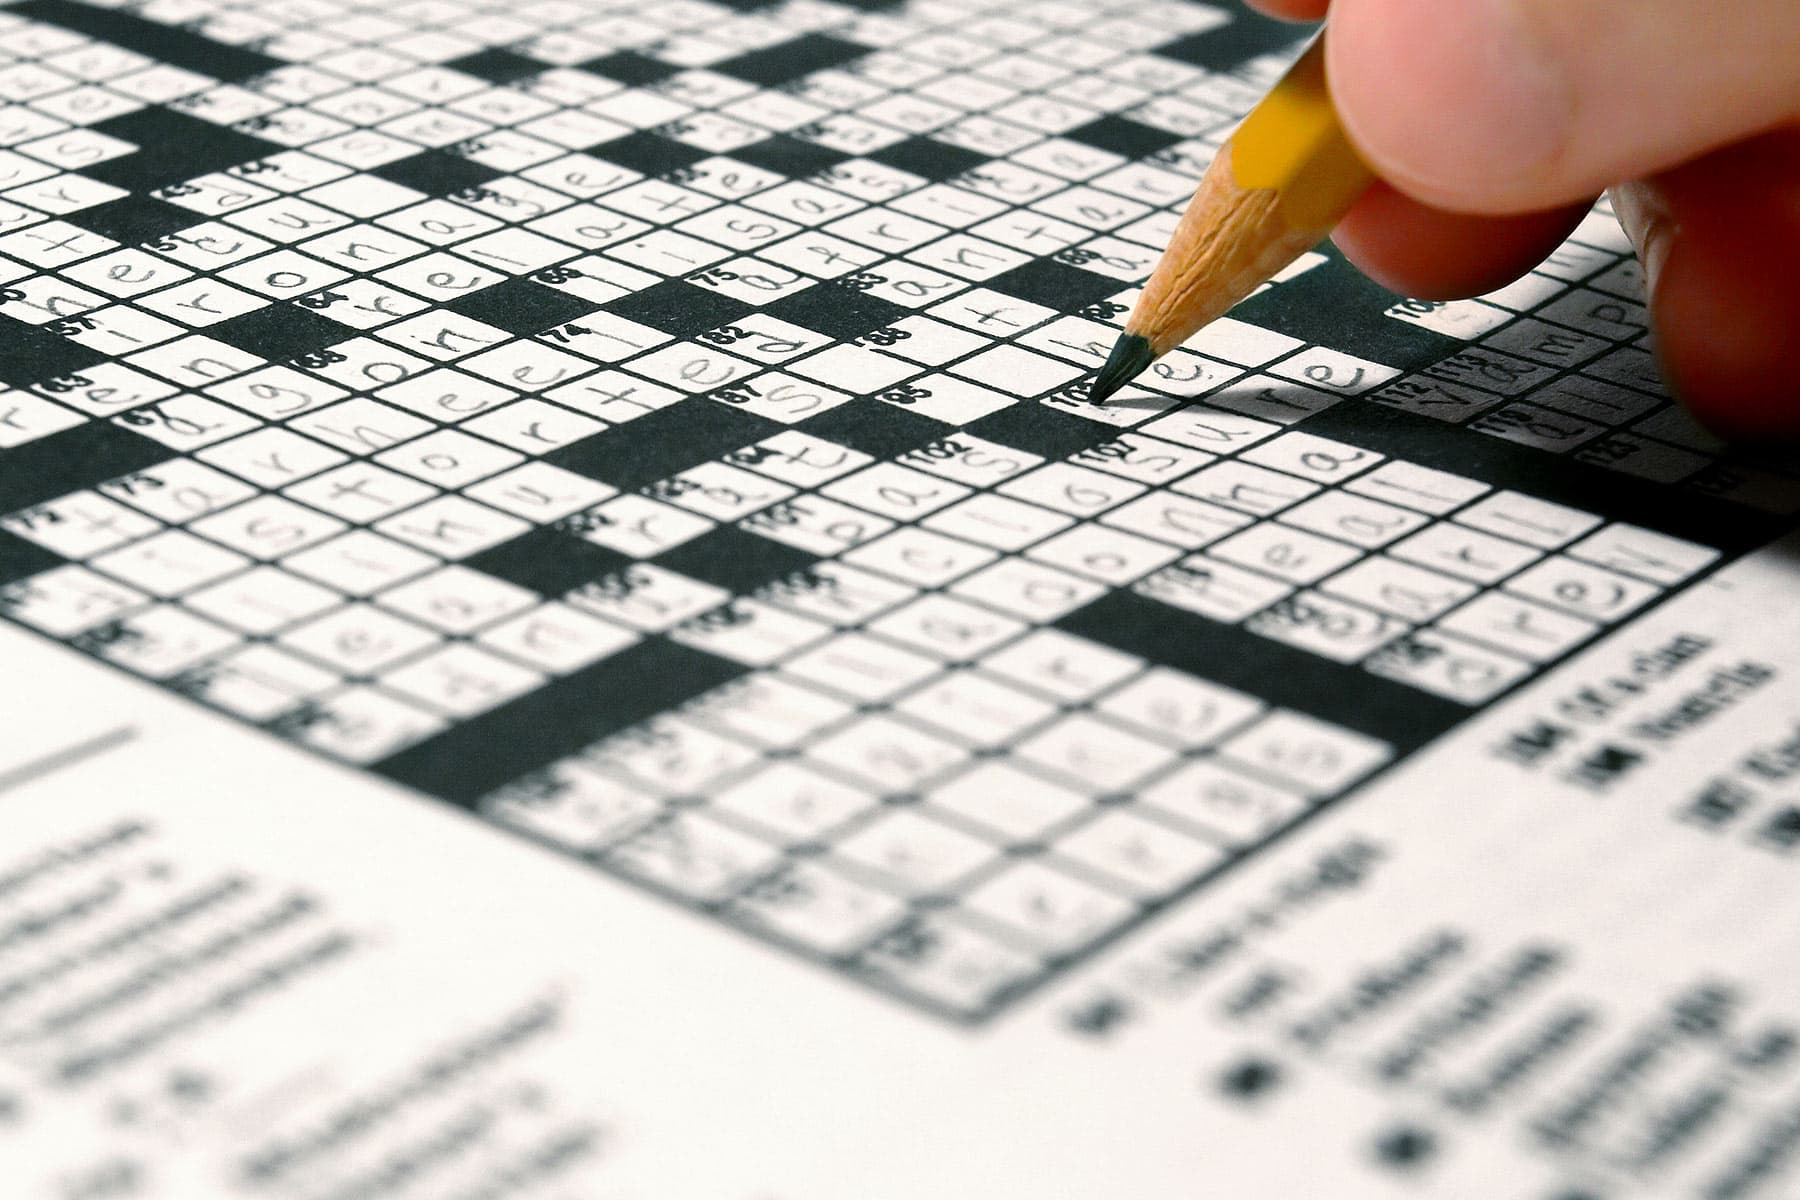 What’s Better for Your Brain, Crossword Puzzles or Computer Games?